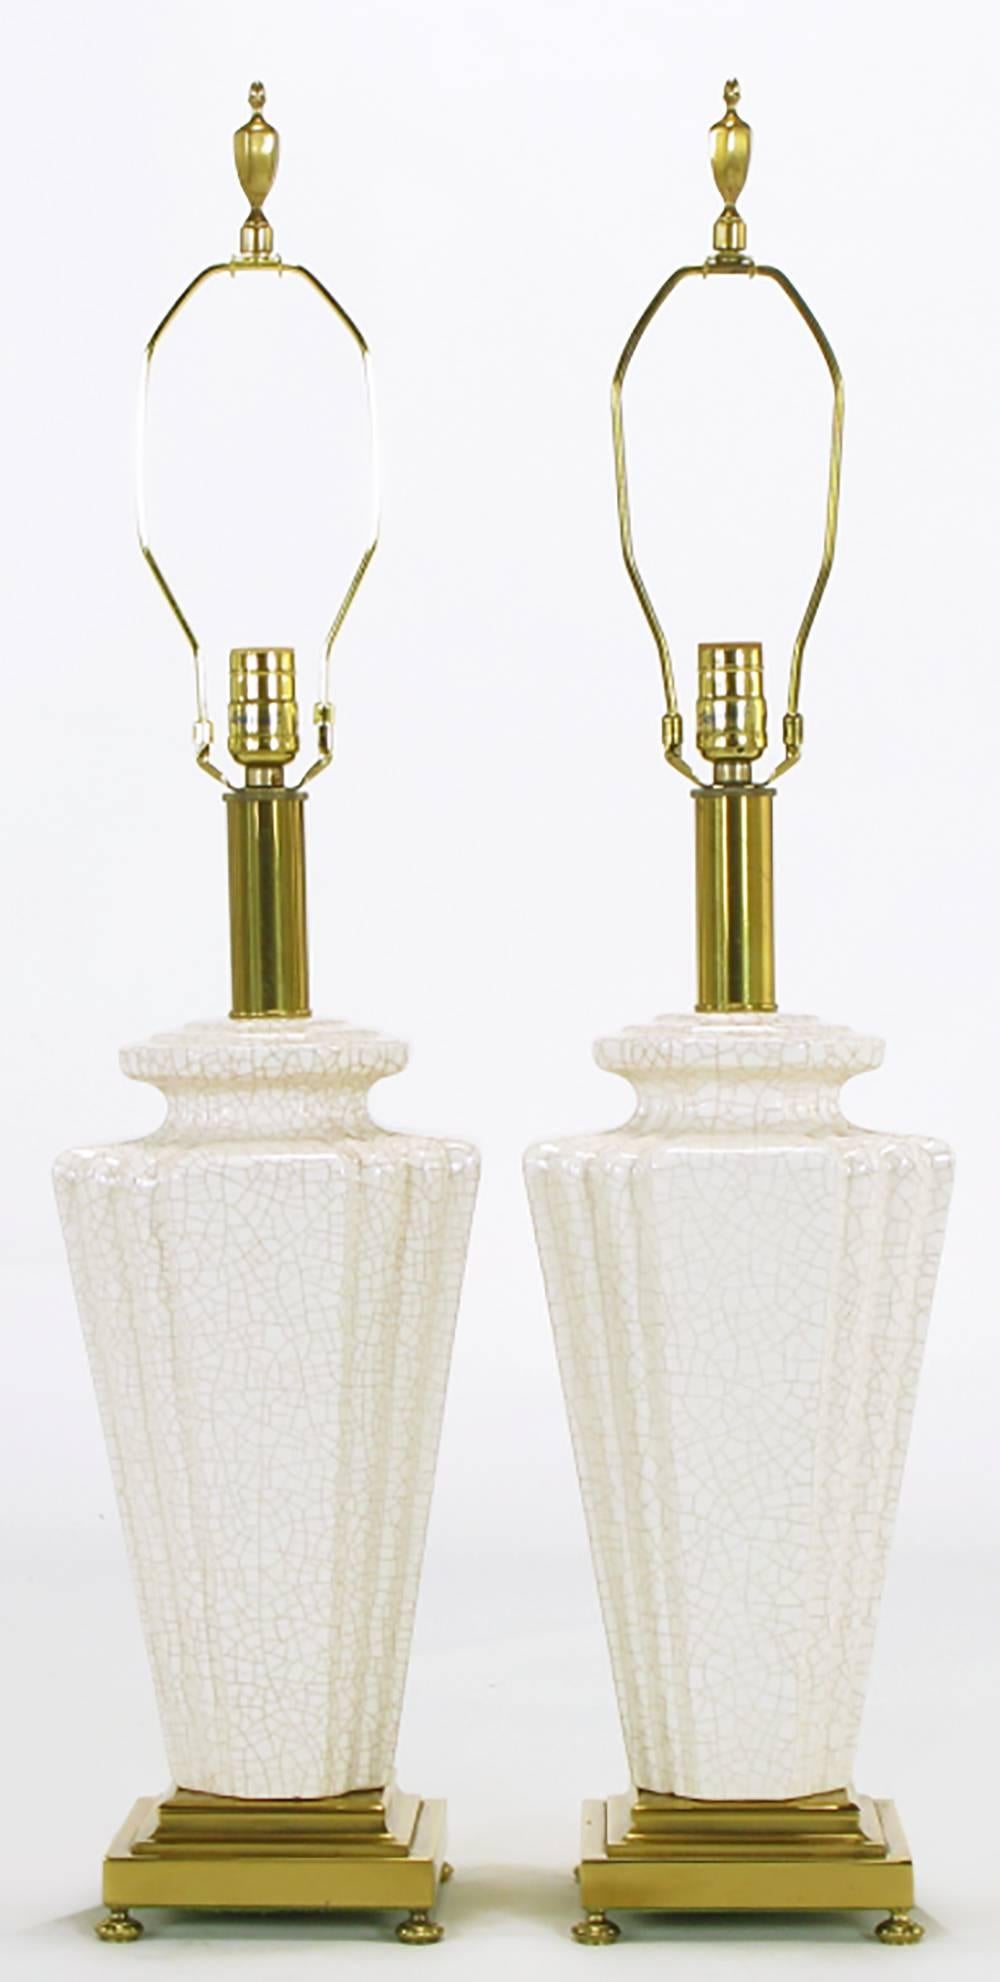 Elegant Rembrandt lamp company table lamps with ceramic bodies in urn-form, with stepped-back corners, finished in an off-white craquelure glaze. The base is finished in brass, with brass bun feet. Original finials. Sold sans shades.